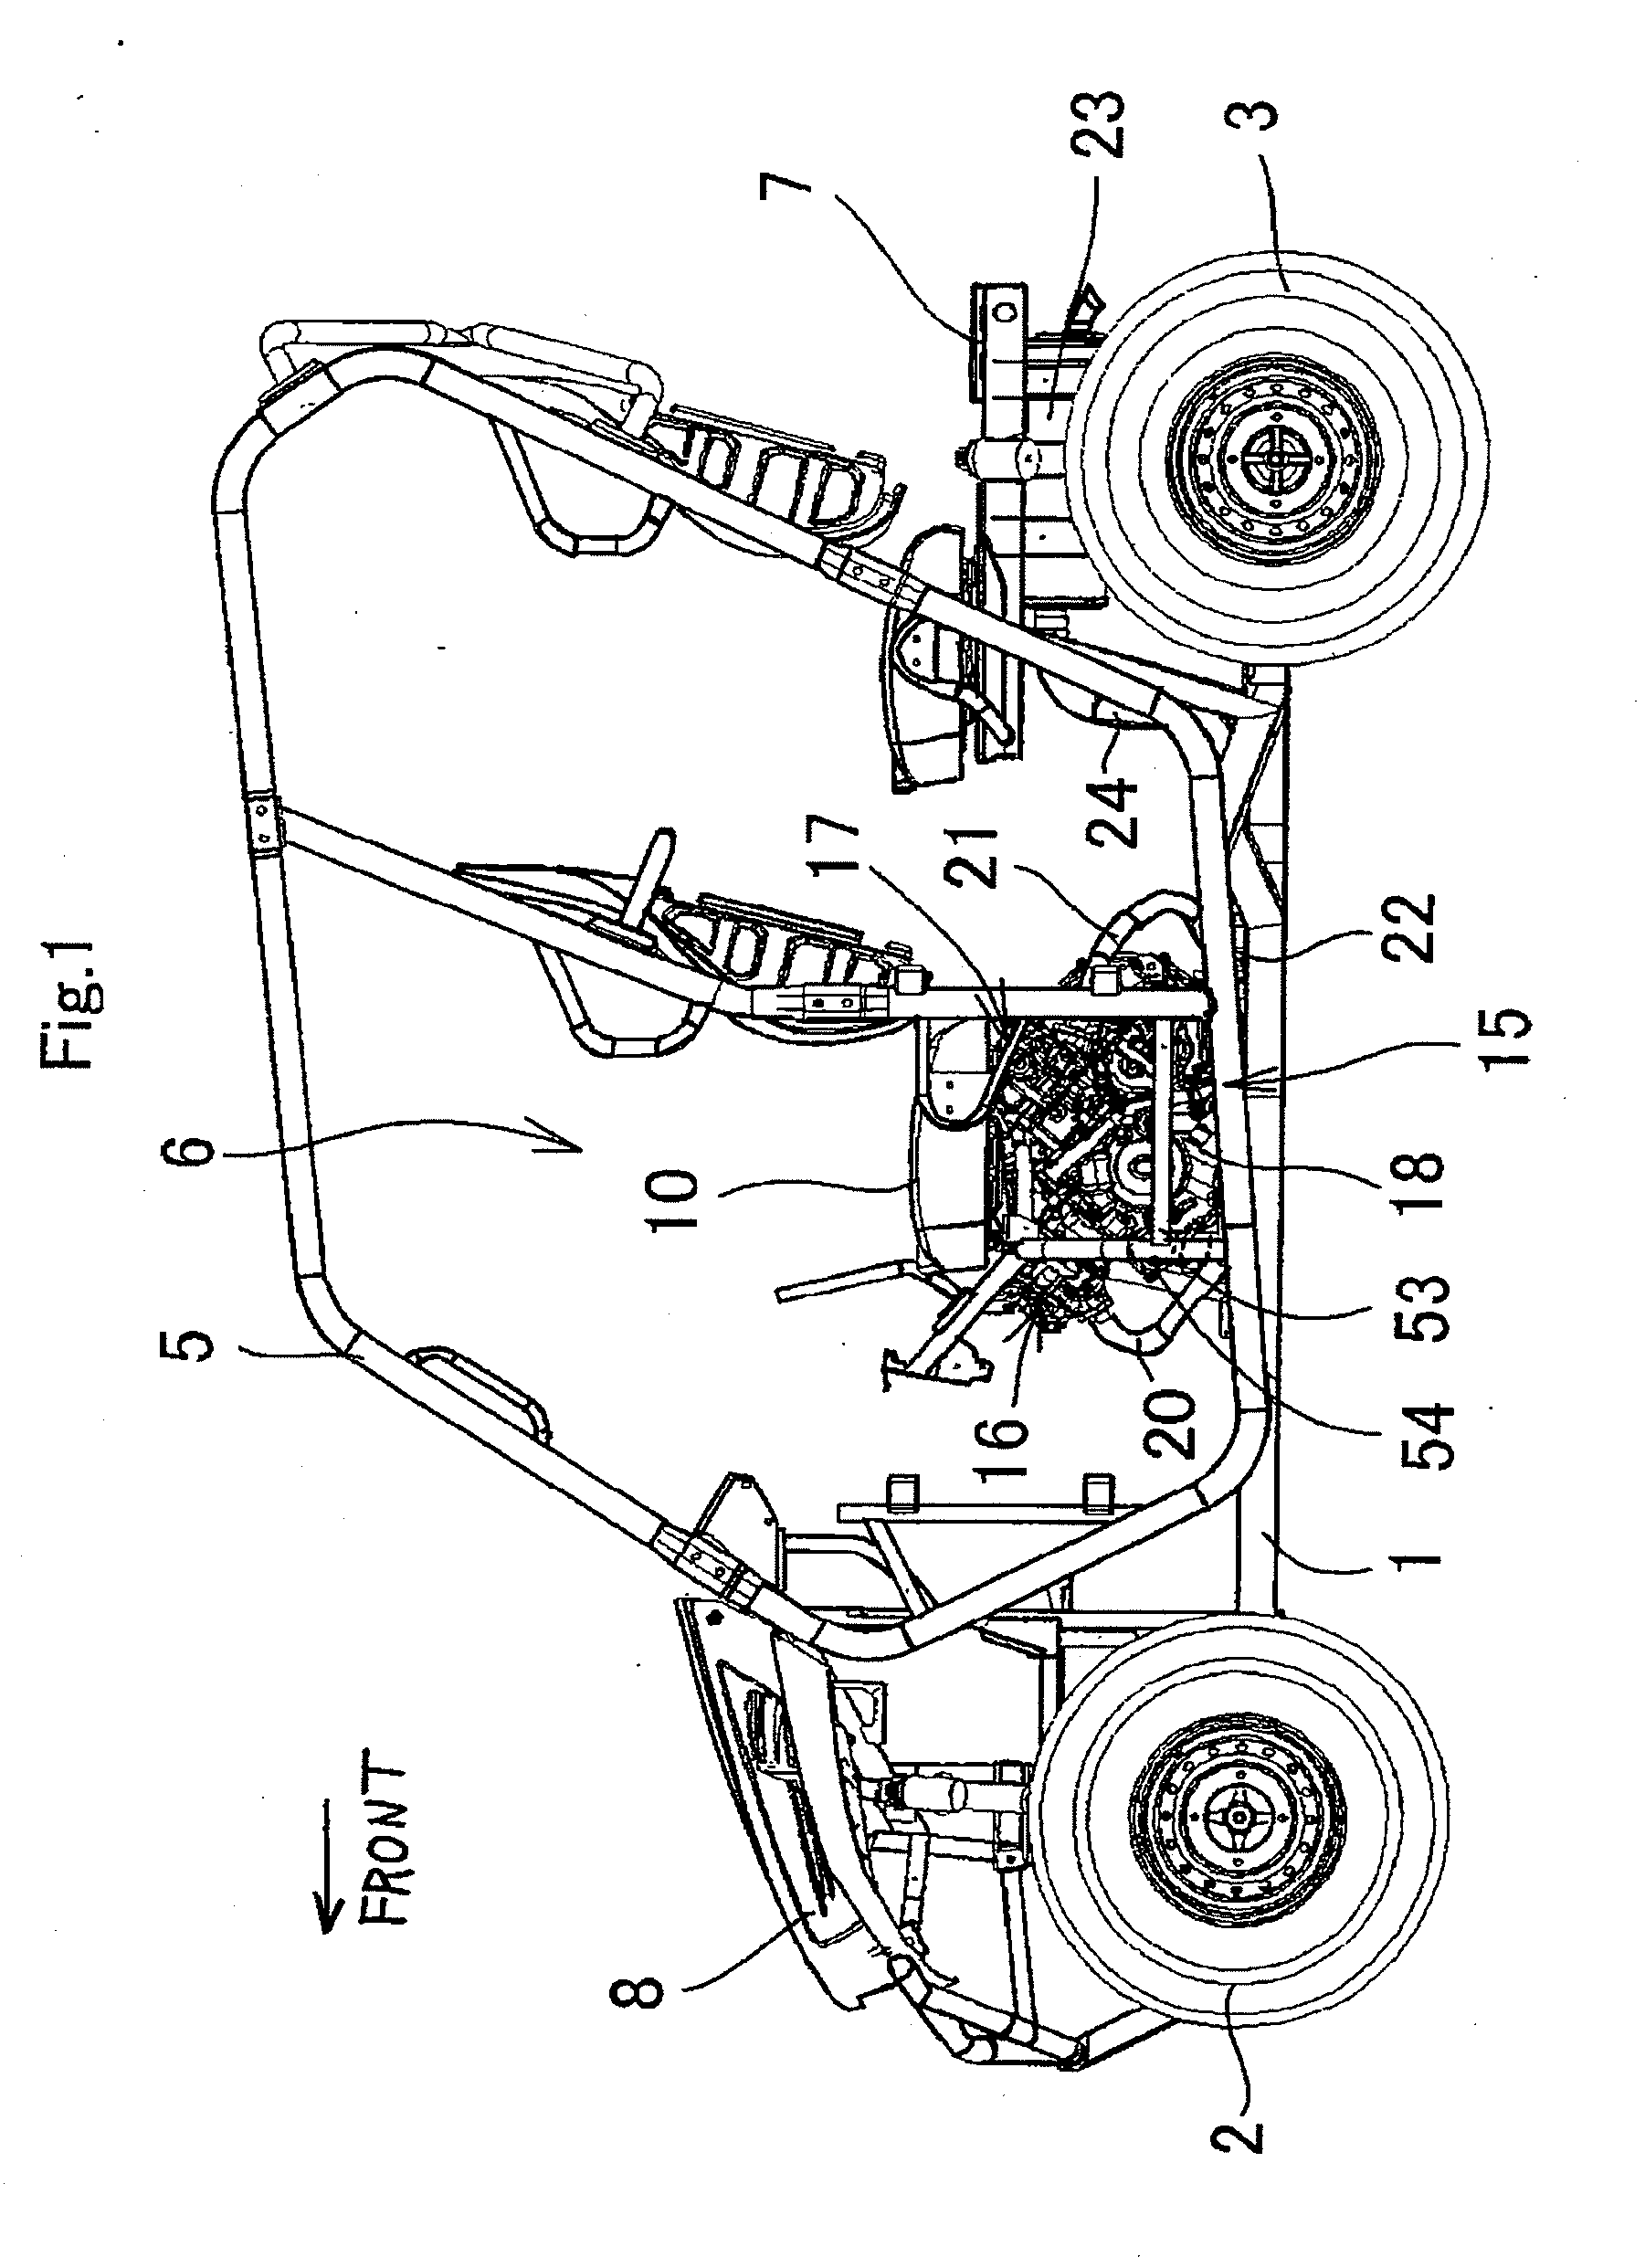 Lubricating oil feeding structure of engine